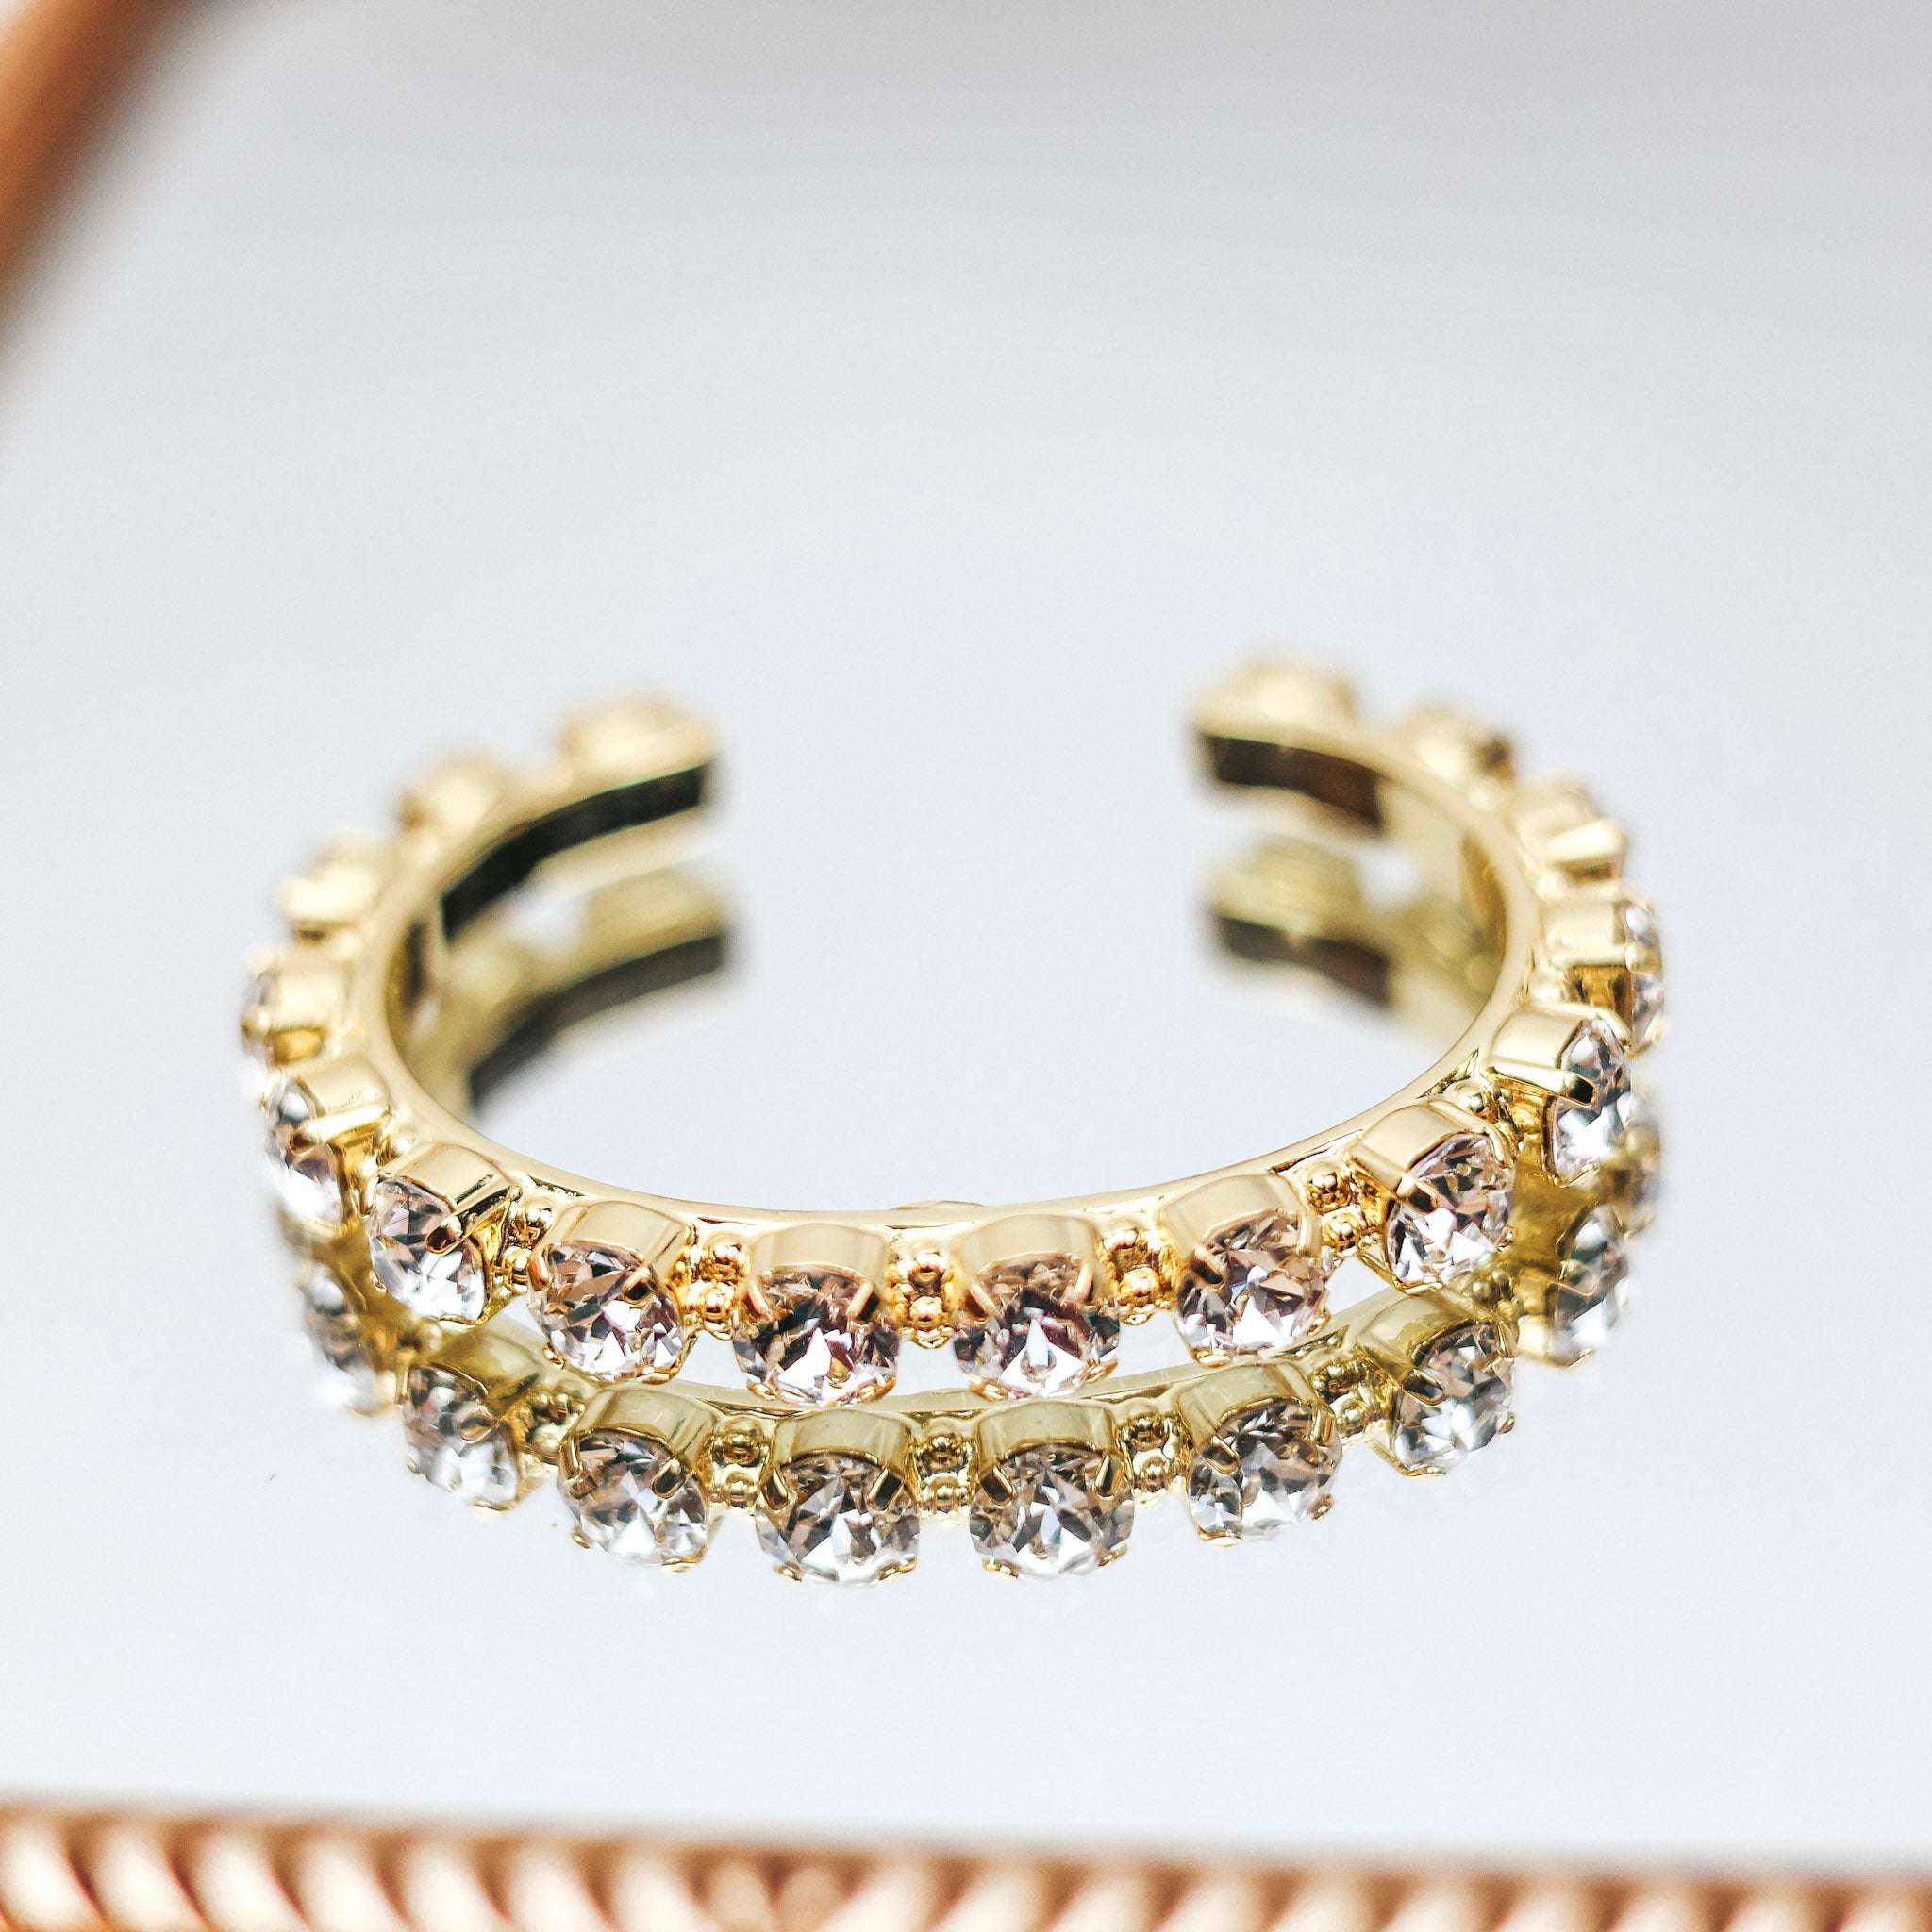 A gold tone cuff bracelet with clear crystals along the cuff.